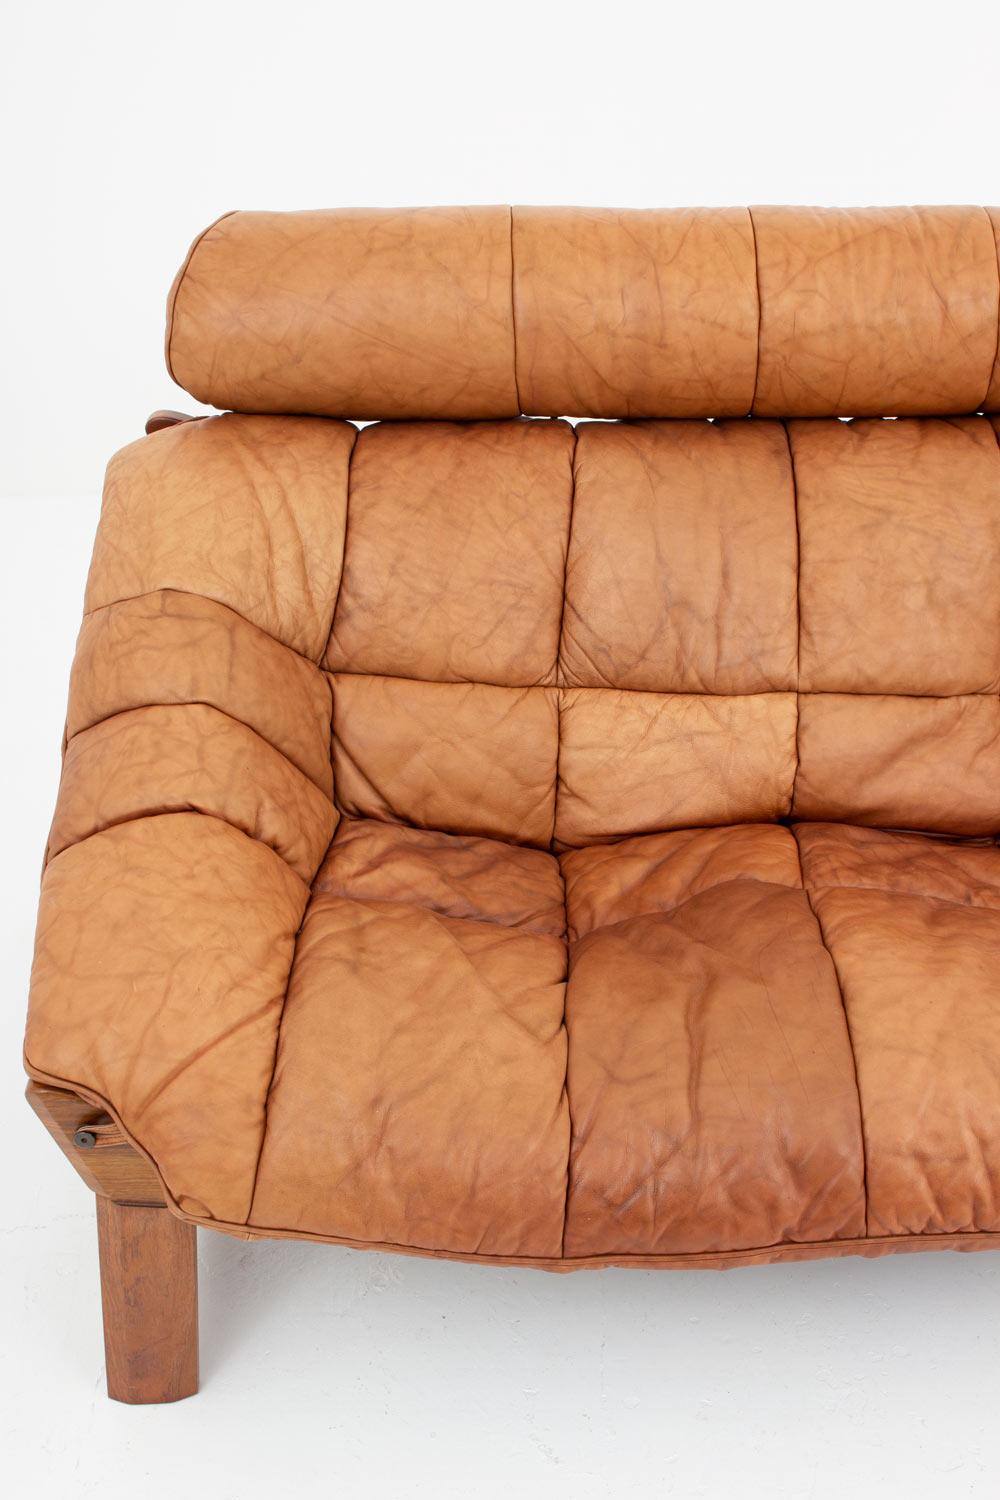 Percival Lafér-Style Sofas and Lounge Chair in Cognac Leather 8